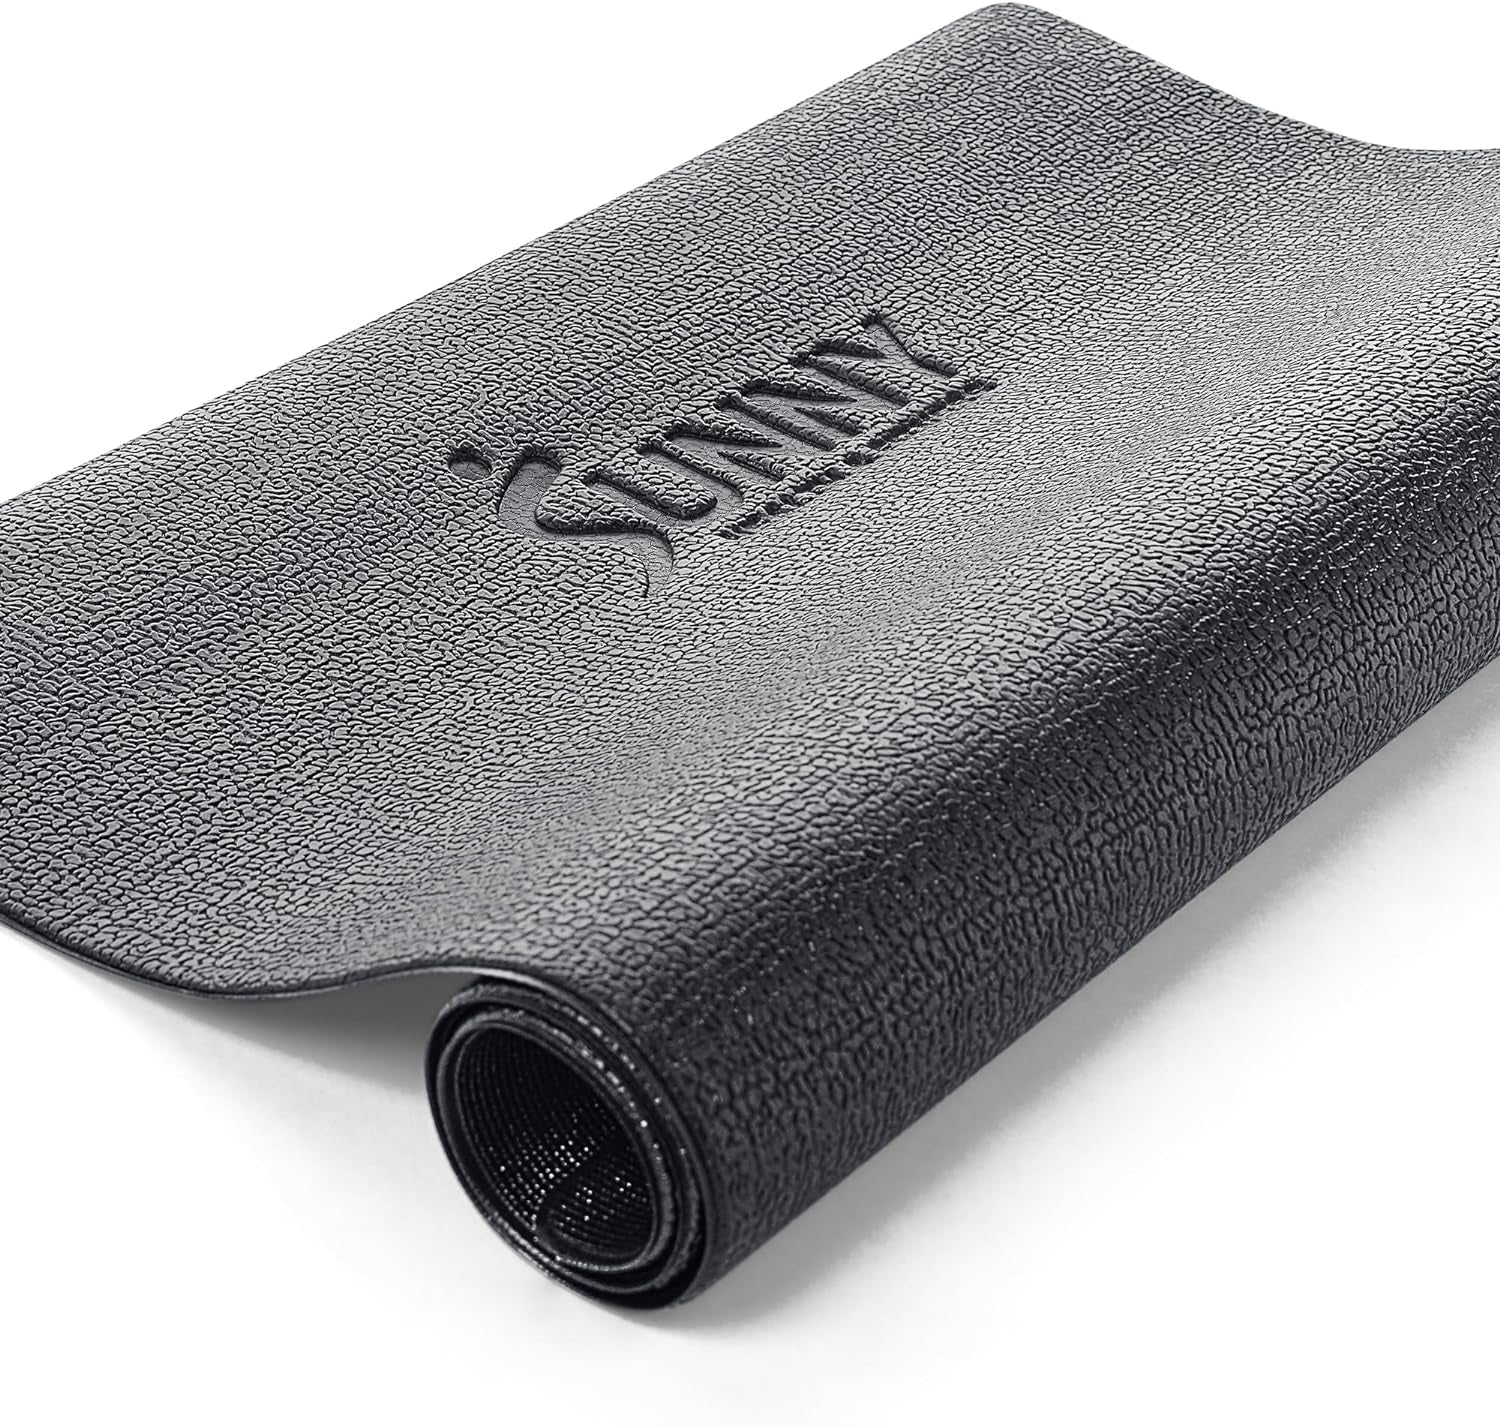 Home Gym Foam Floor Protector Mat for Fitness & Exercise Equipment - Available in 4 Size Options